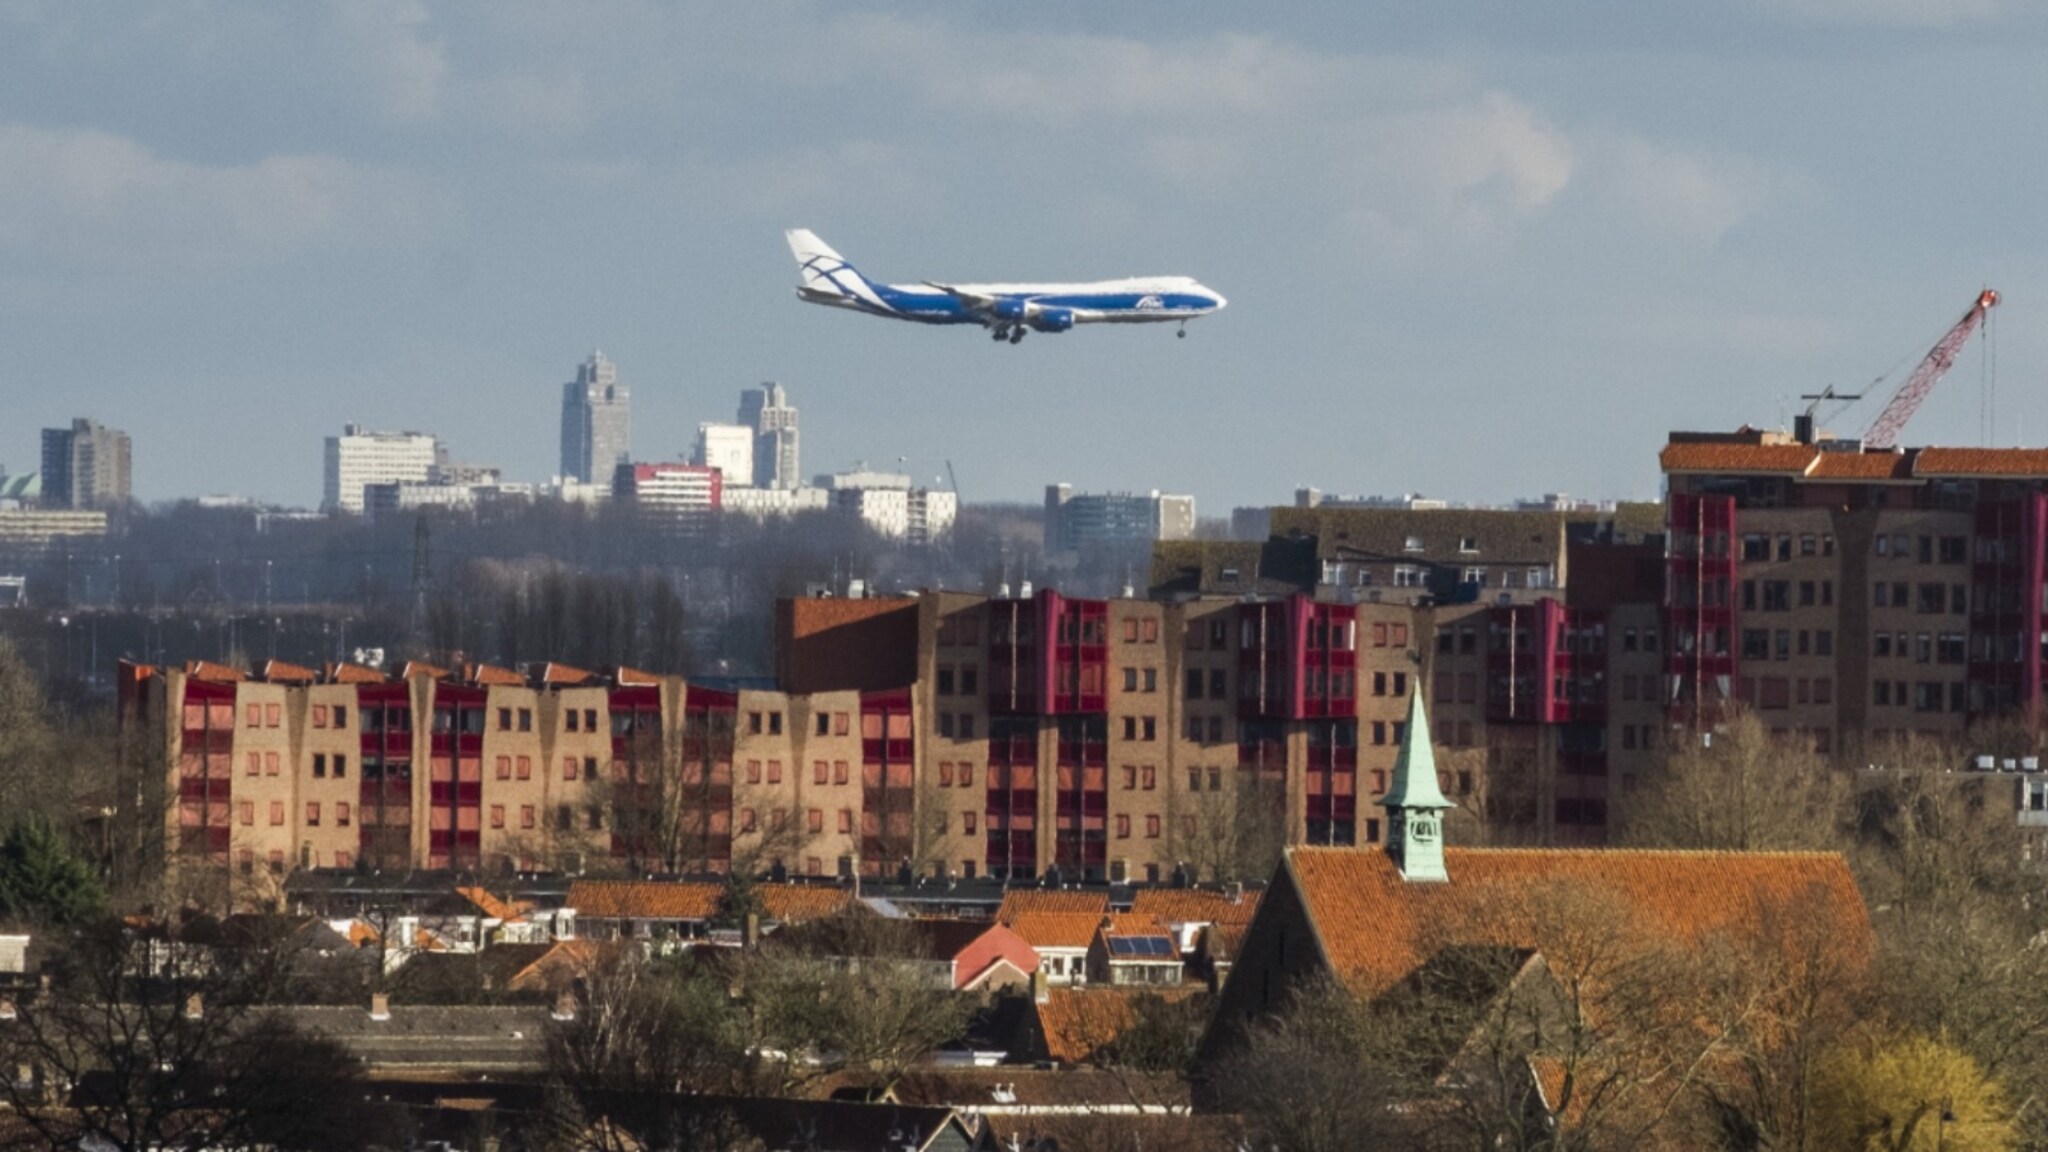 Significant increase in landing aircraft on the way, concern Utrecht and Gelderland